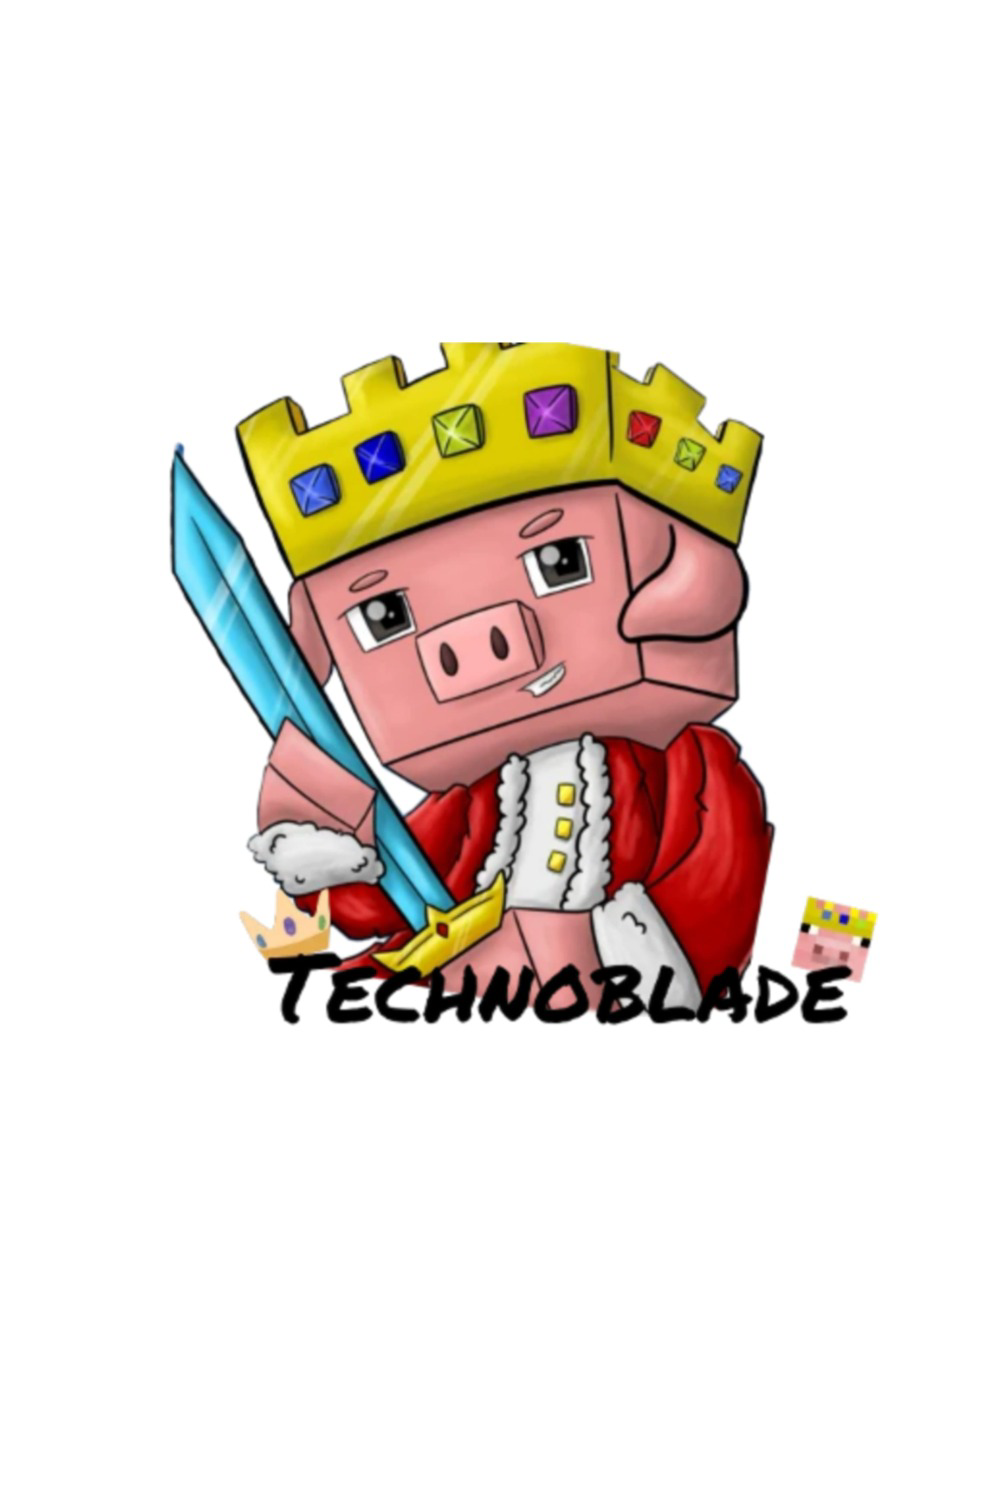 2 Technoblade Images, Stock Photos, 3D objects, & Vectors